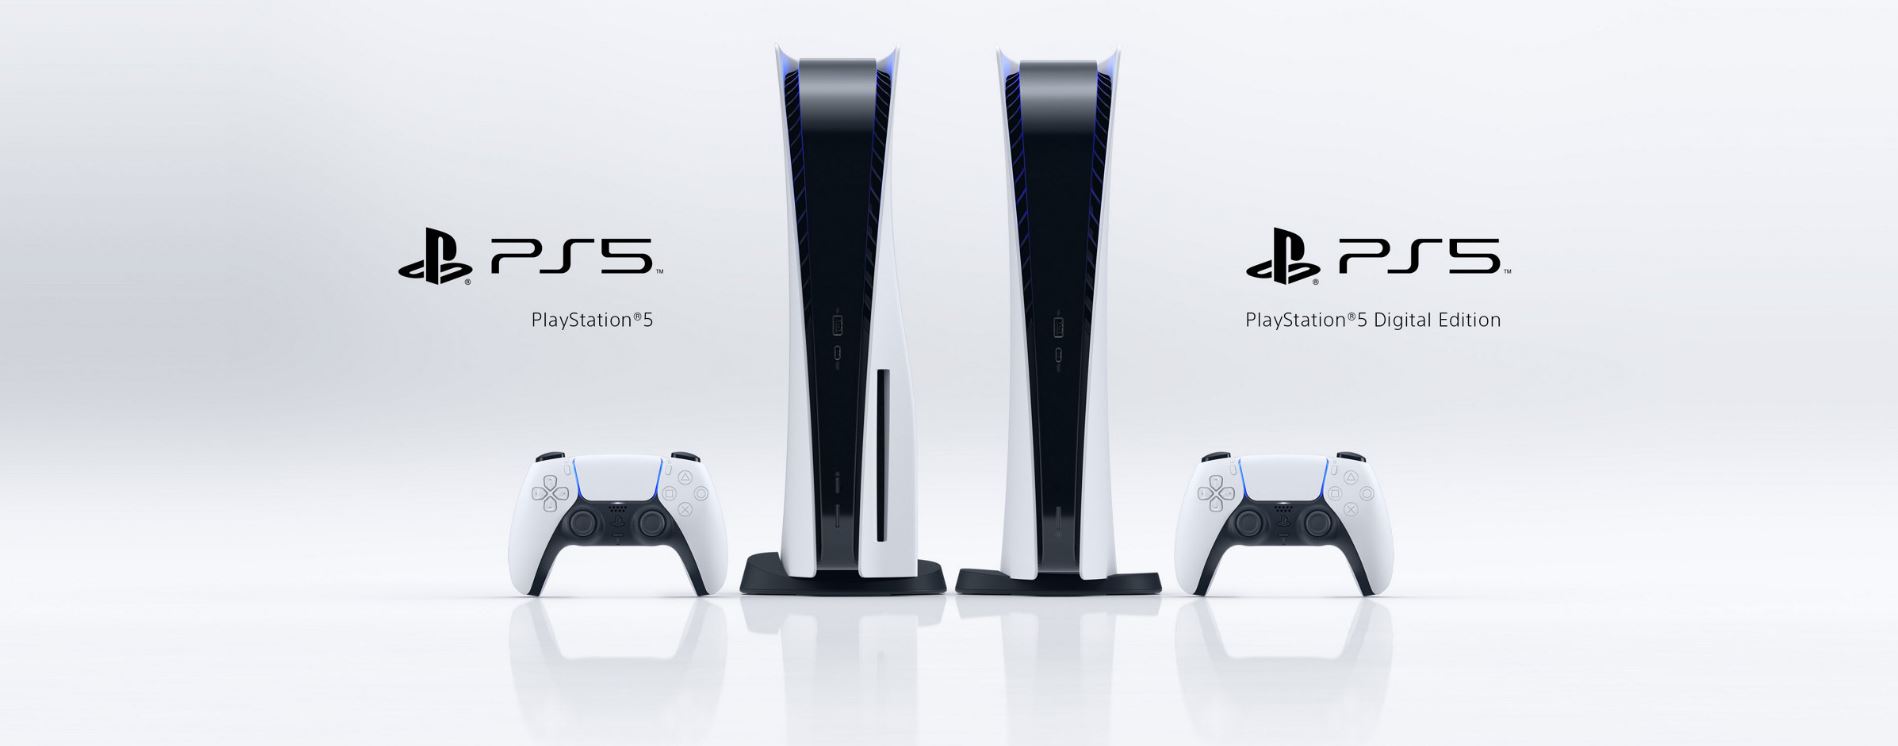 PS5 vs PS5 Digital Edition: Which console is better? - Android Authority